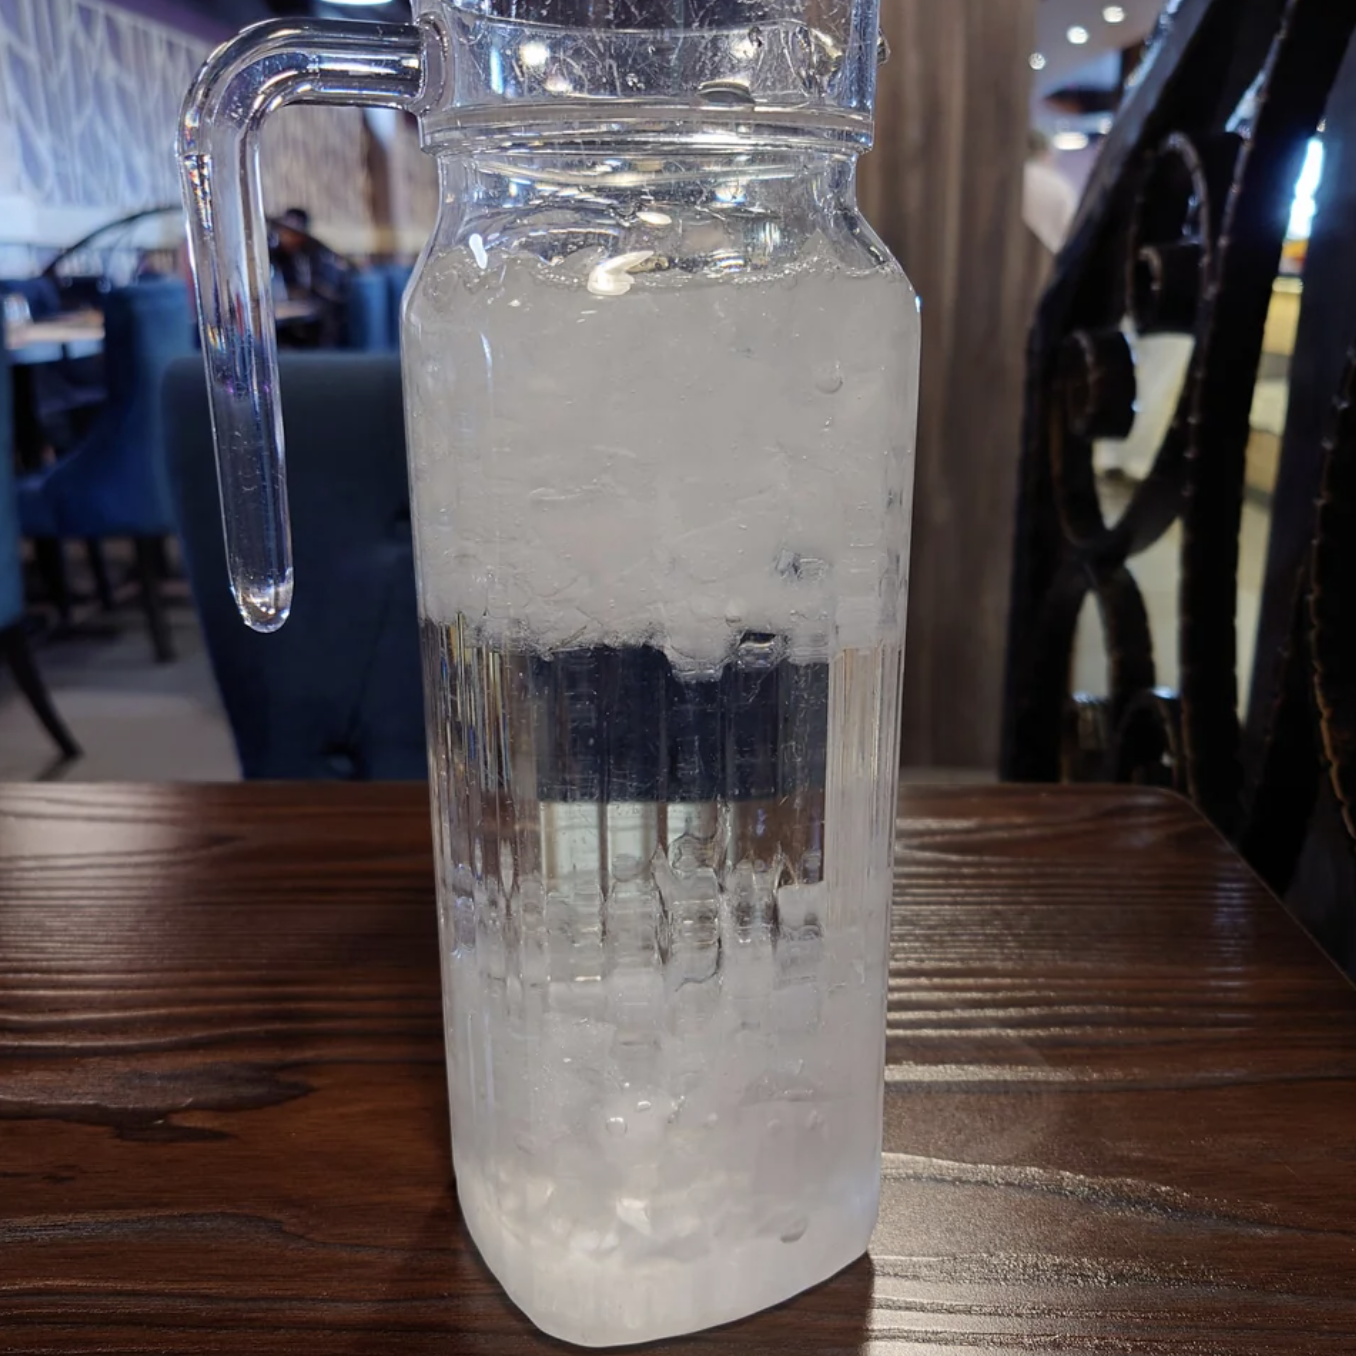 ice separated to the top and bottom